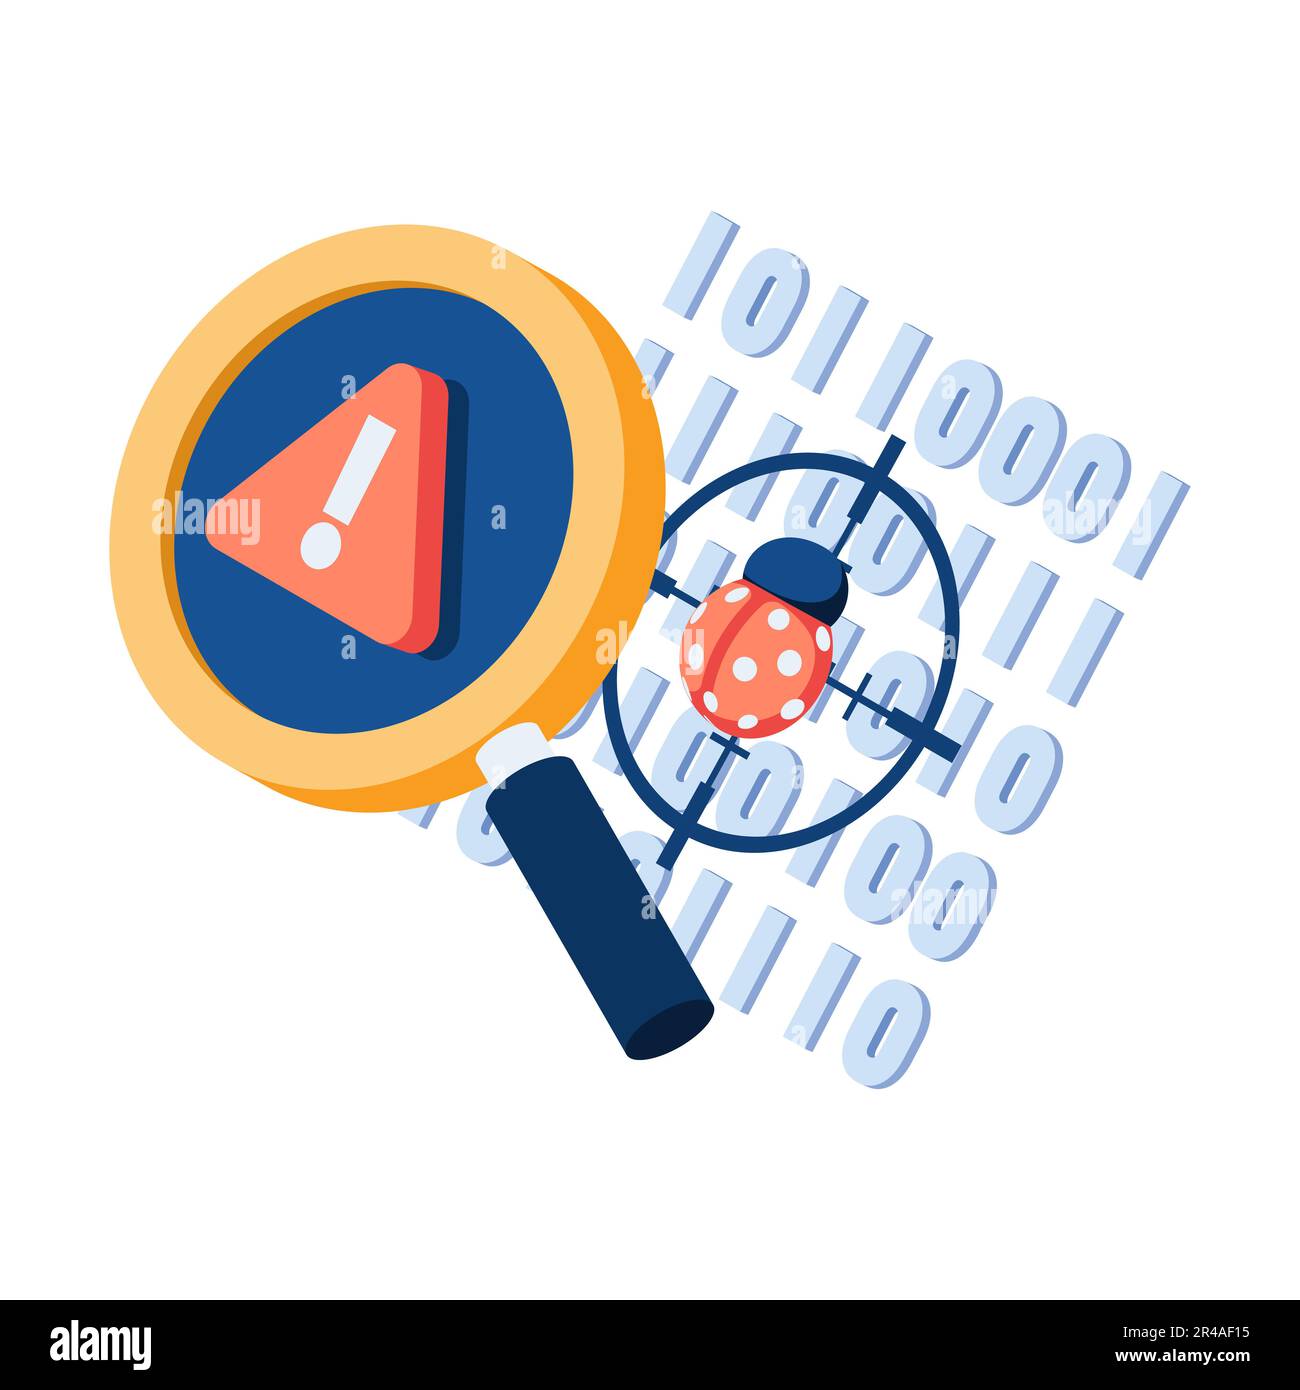 Flat 3d Isometric Magnifier Scanning Bug on Binary Code. Software Testing and Software Bug Concept. Stock Vector